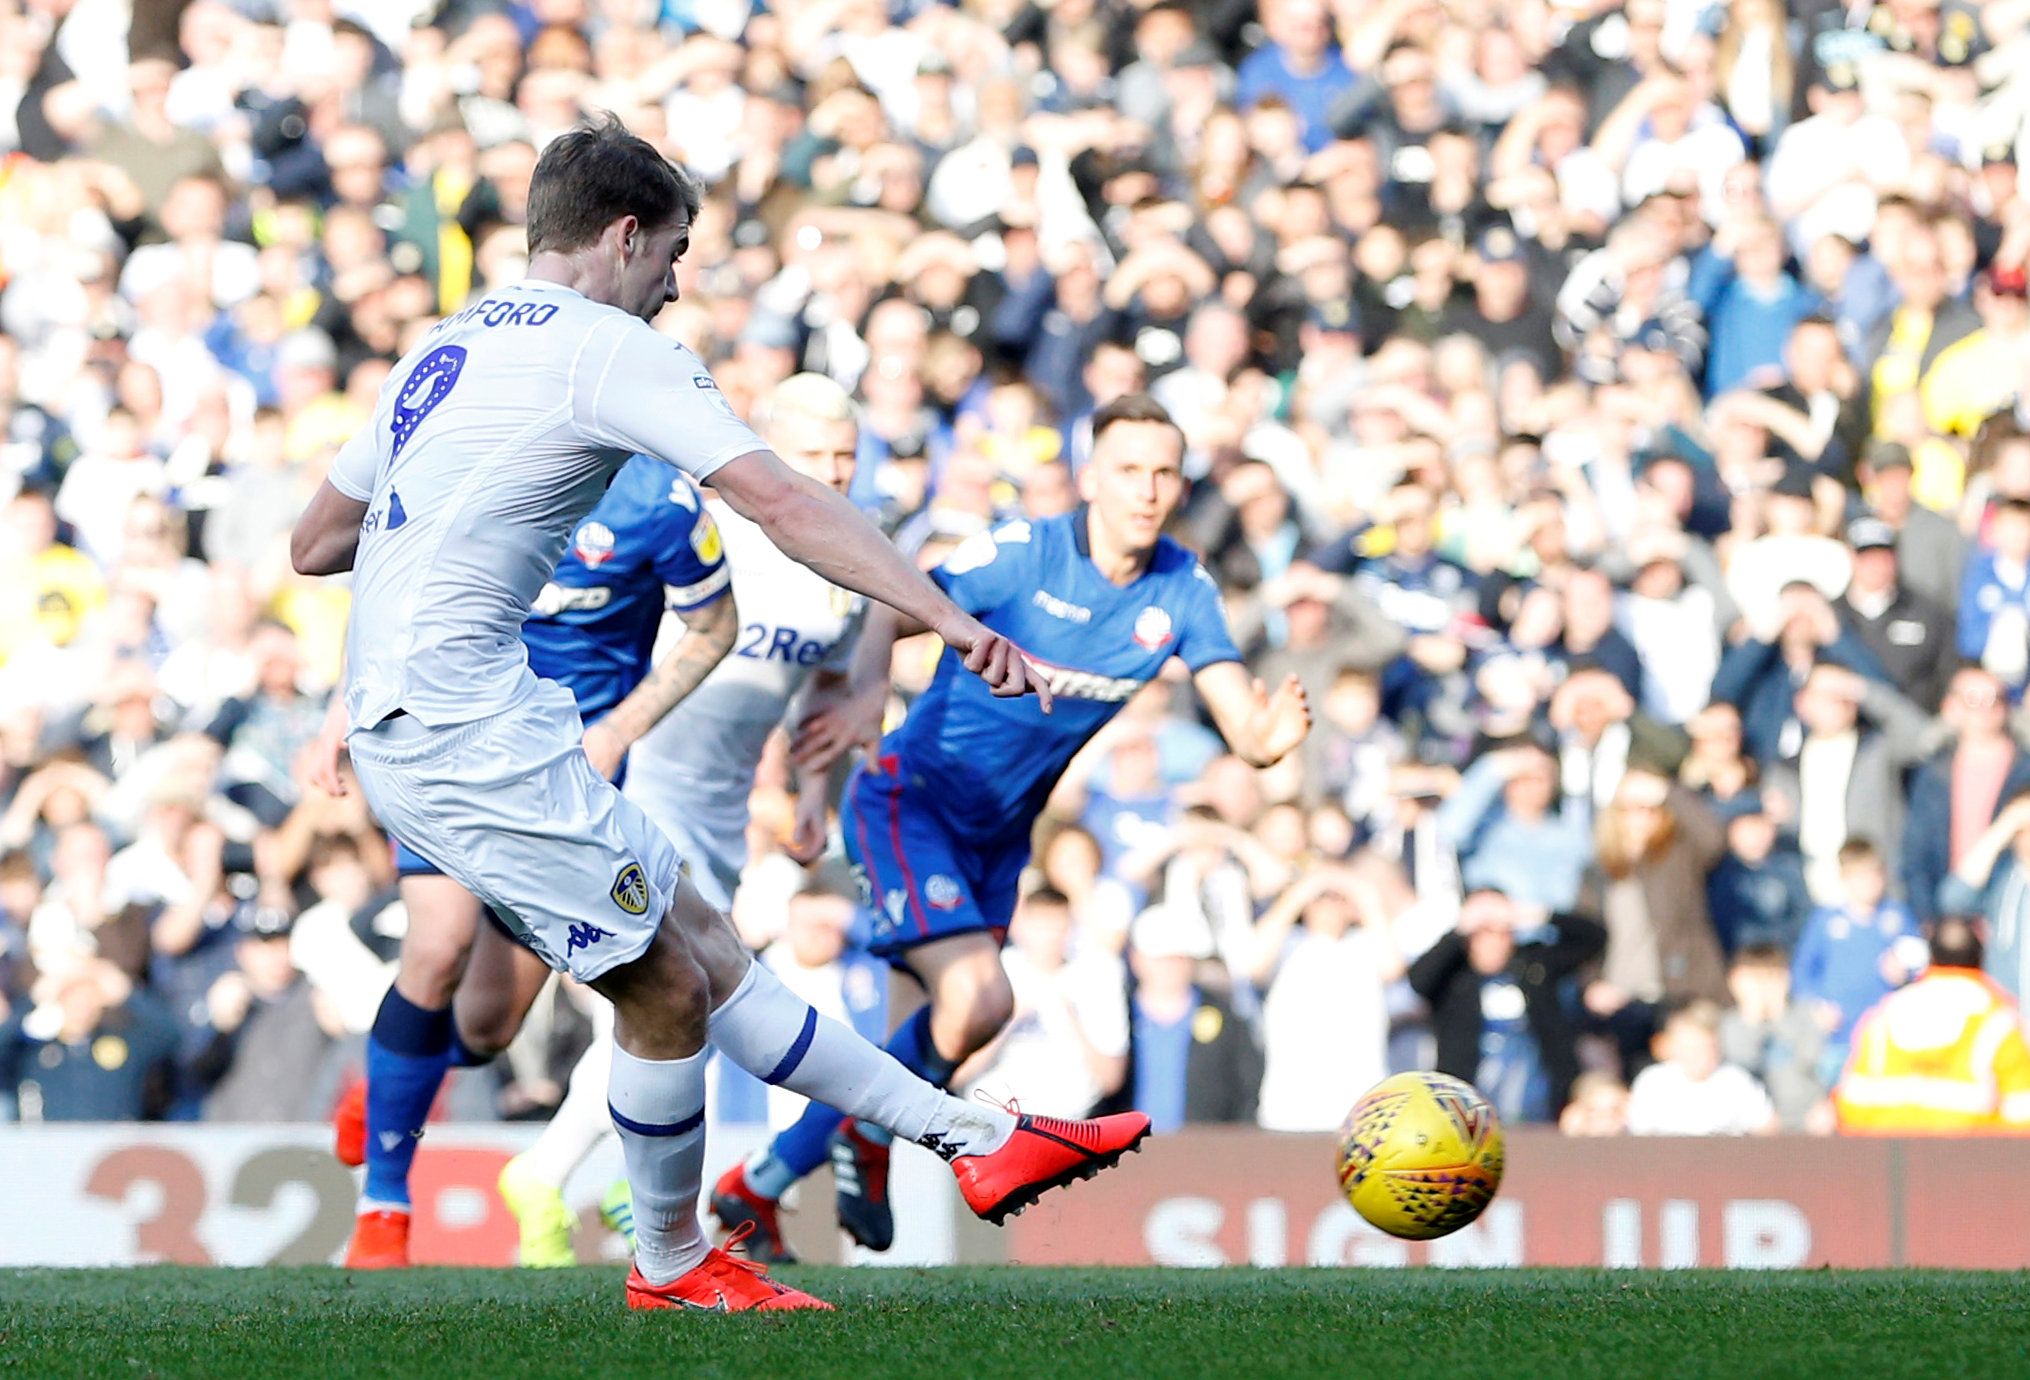 Soccer Football - Championship - Leeds United v Bolton Wanderers - Elland Road, Leeds, Britain - February 23, 2019  Leeds United's Patrick Bamford scores their first goal from a penalty  Action Images/Ed Sykes  EDITORIAL USE ONLY. No use with unauthorized audio, video, data, fixture lists, club/league logos or 